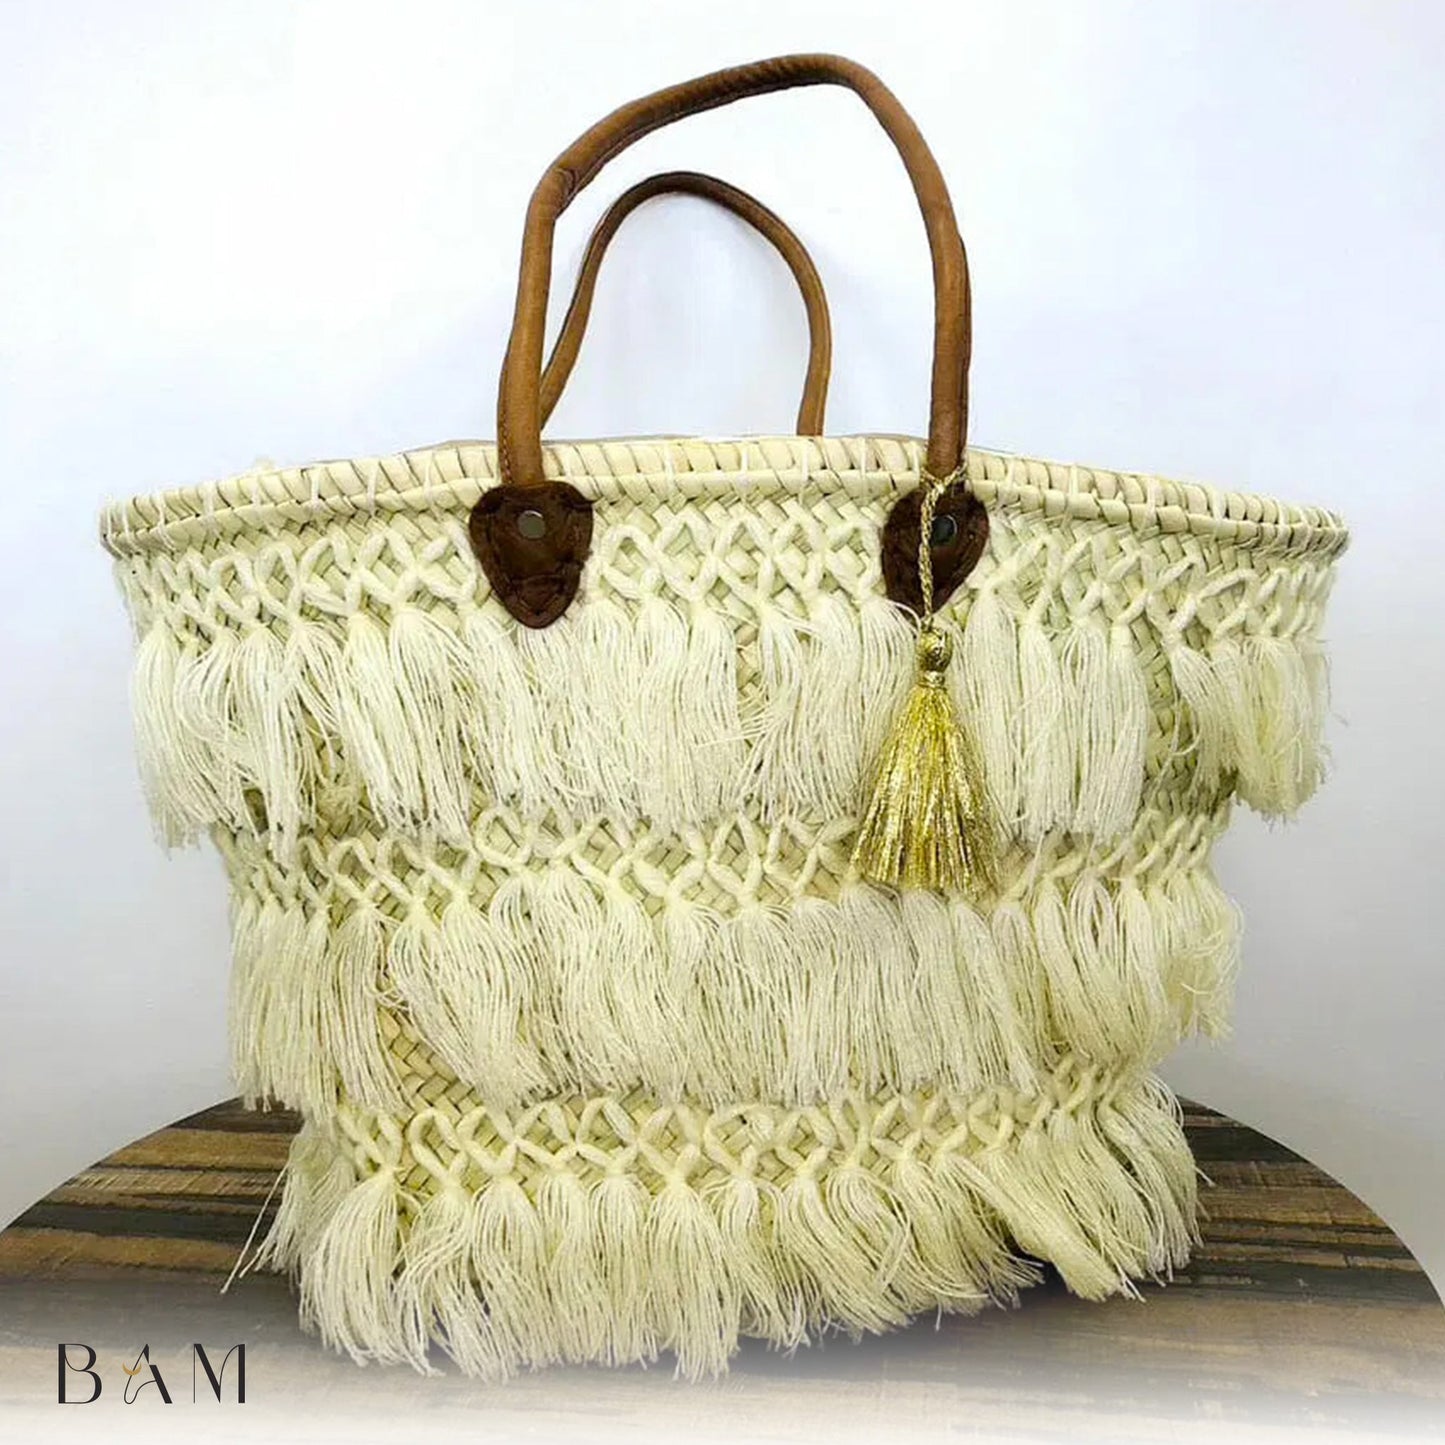 Our Doum Bags are Made From Palm Leaves That are individually Cut, Dried, Stripped and Handwoven by Moroccan Artisan's 100% homemade For all Seasons, Standard Size